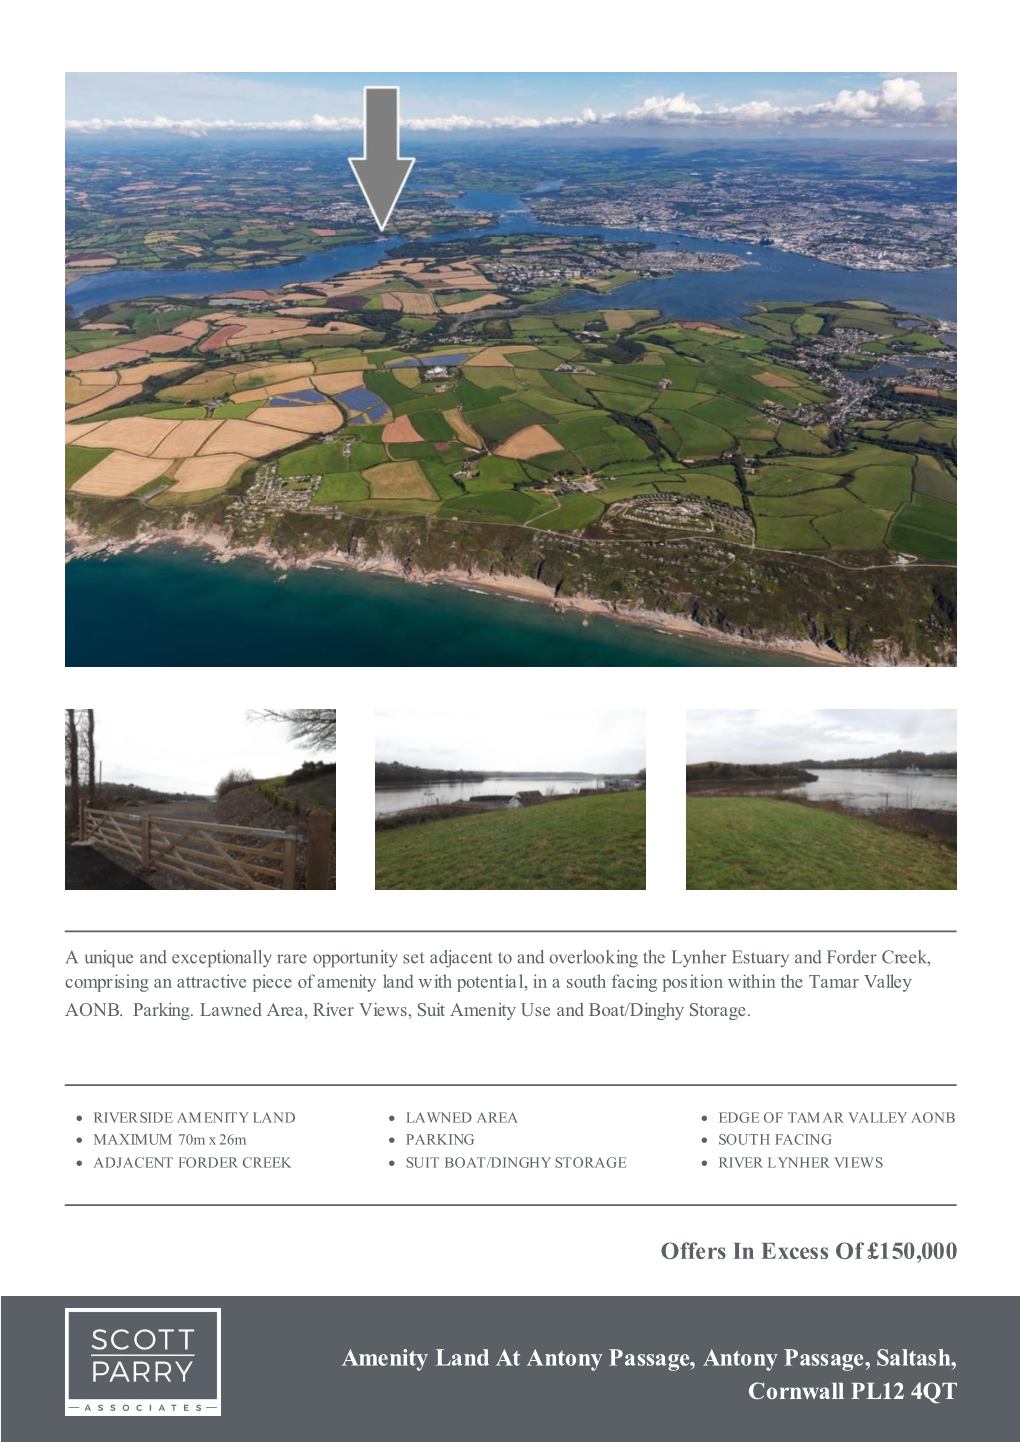 Amenity Land at Antony Passage, Antony Passage, Saltash, Cornwall PL12 4QT Offers in Excess of £150,000